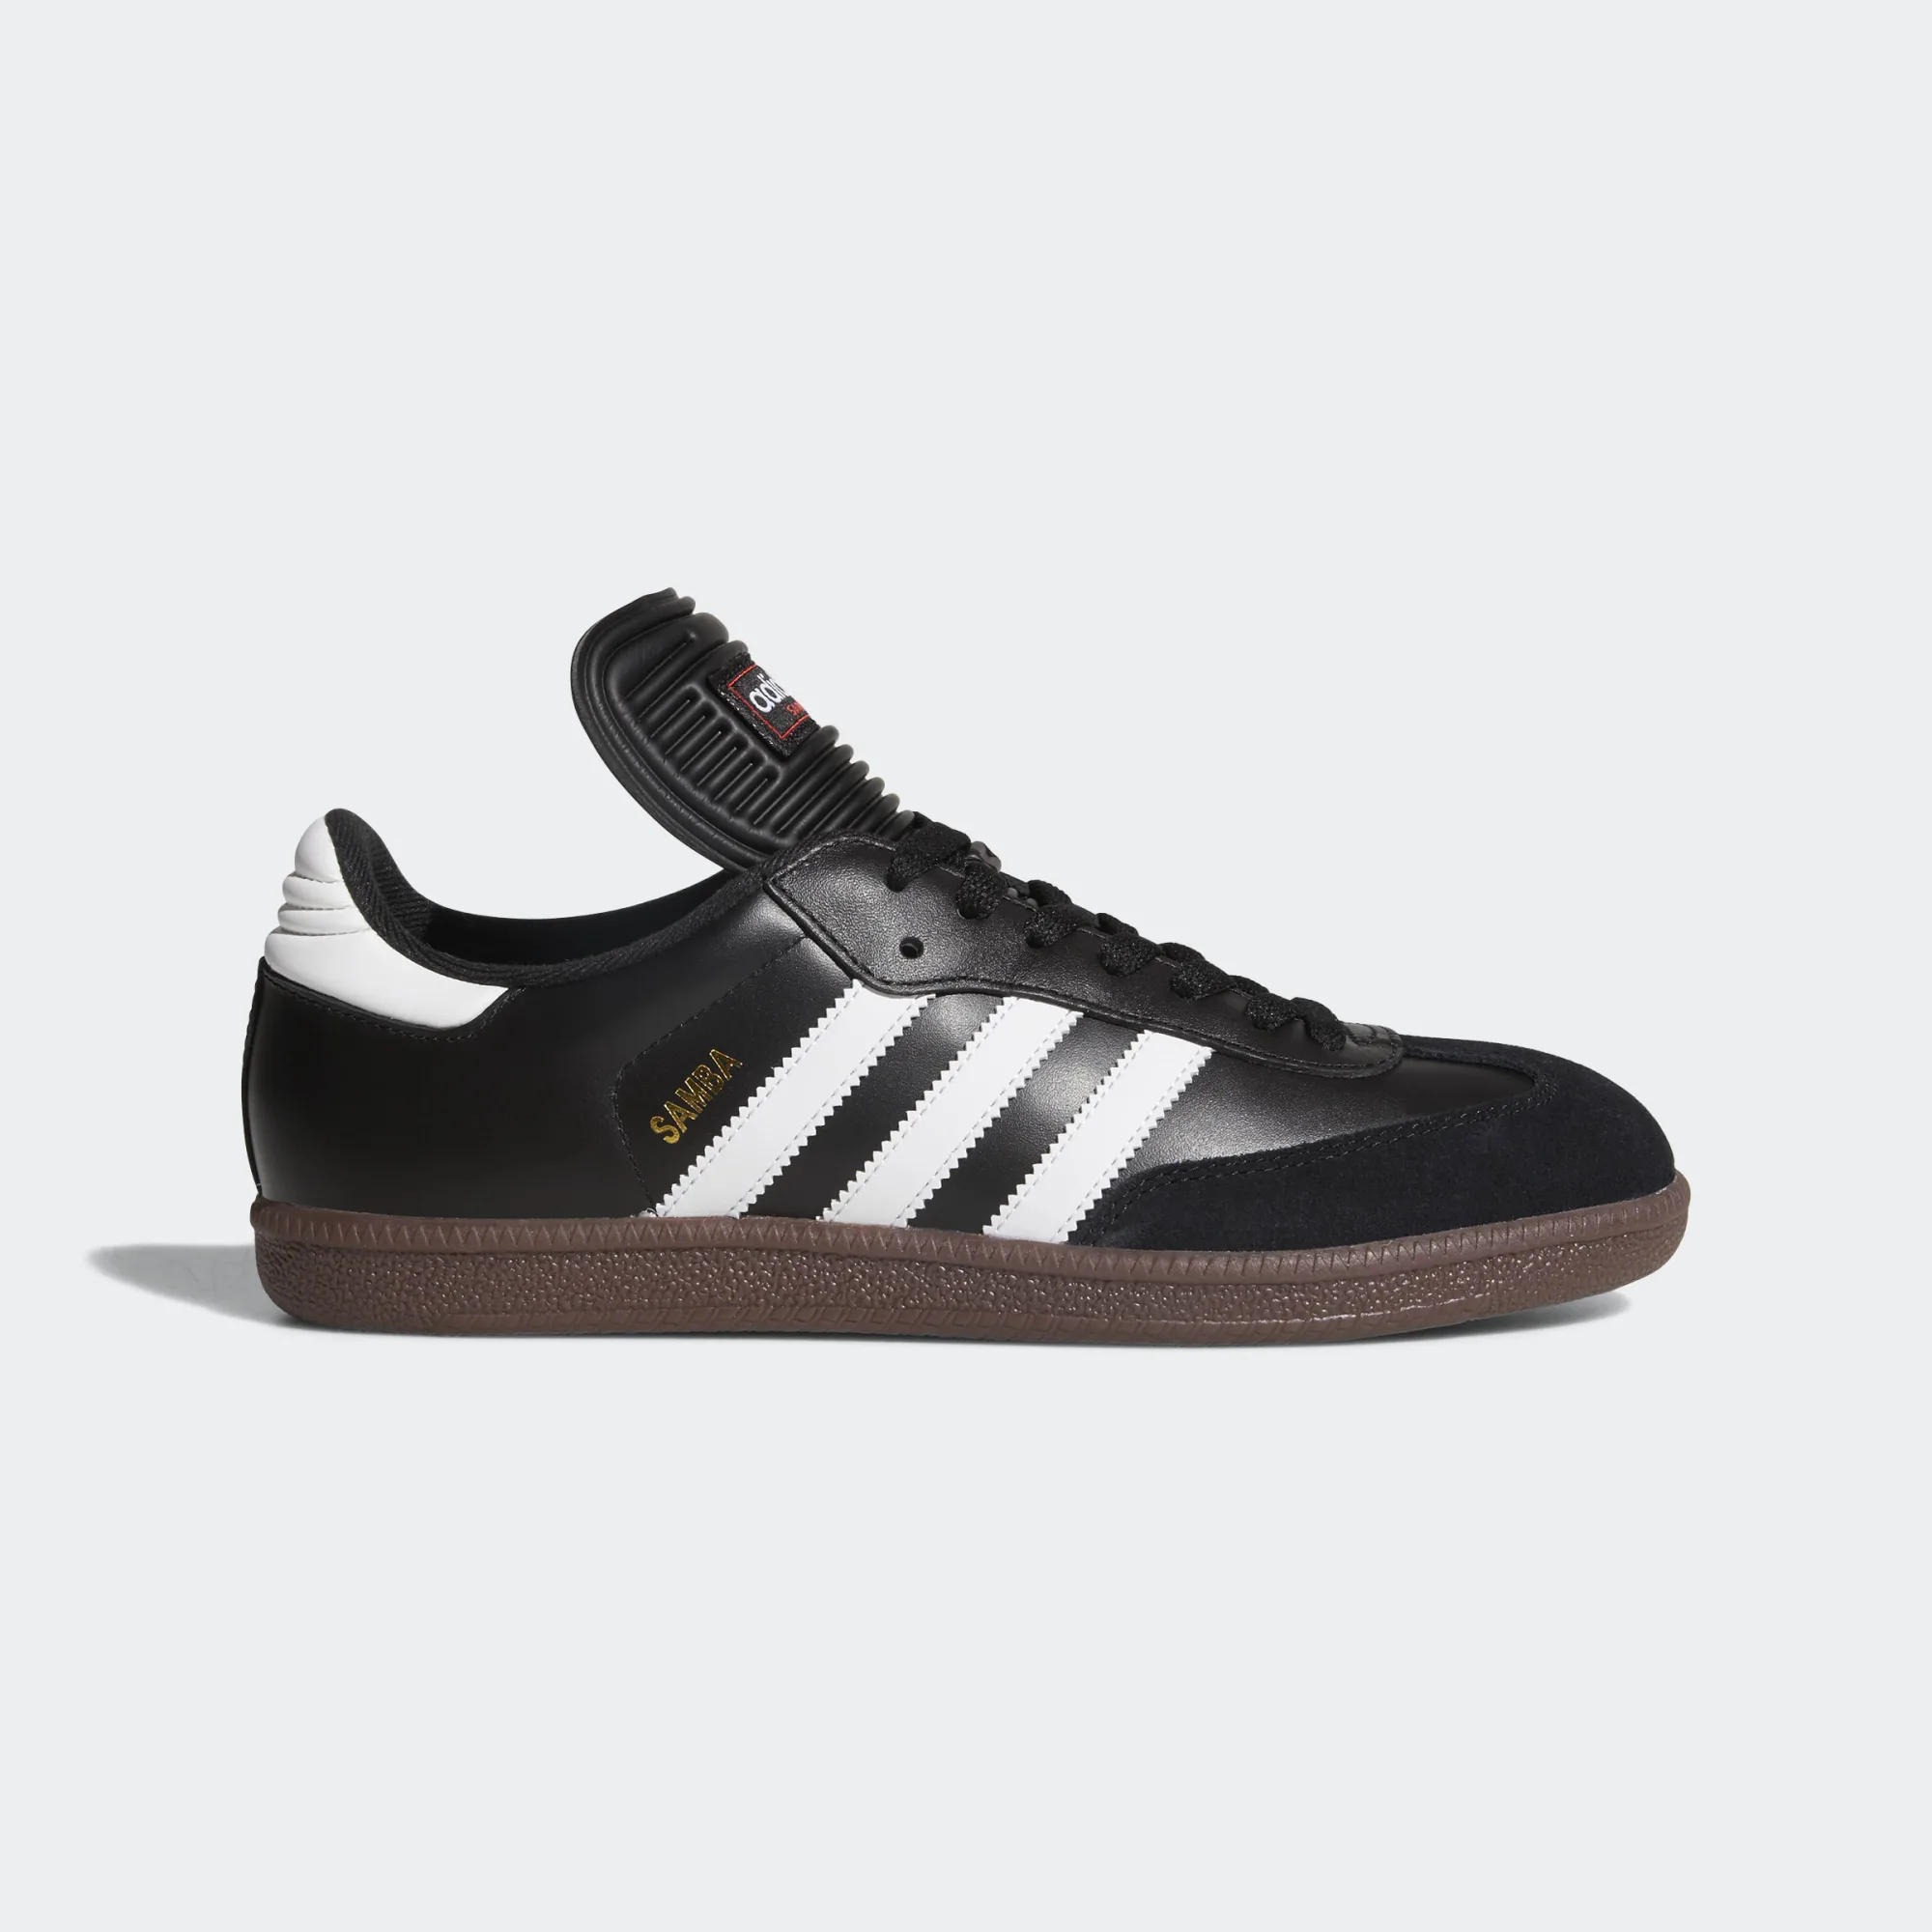 4 Men's Outfits to Wear with Adidas Samba Sneakers